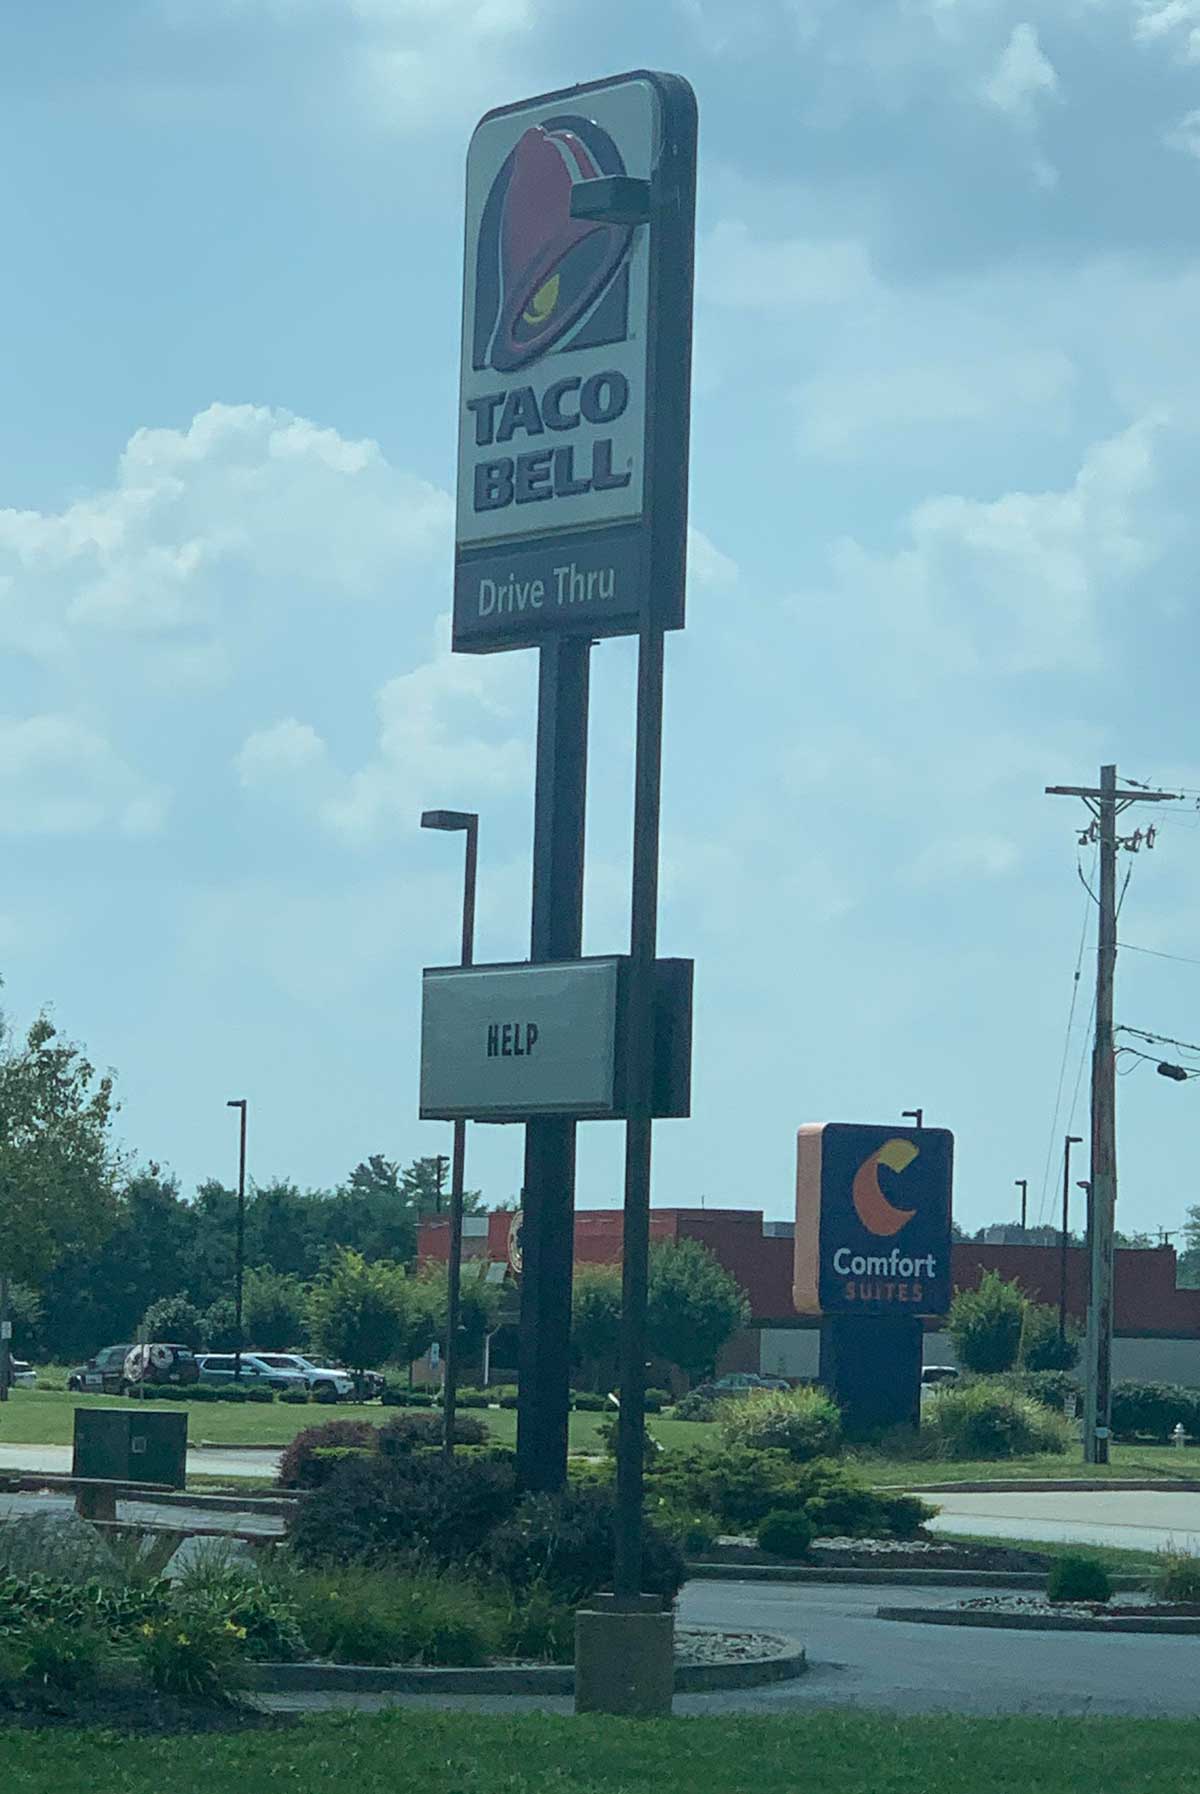 The local Taco Bell seems to be struggling..